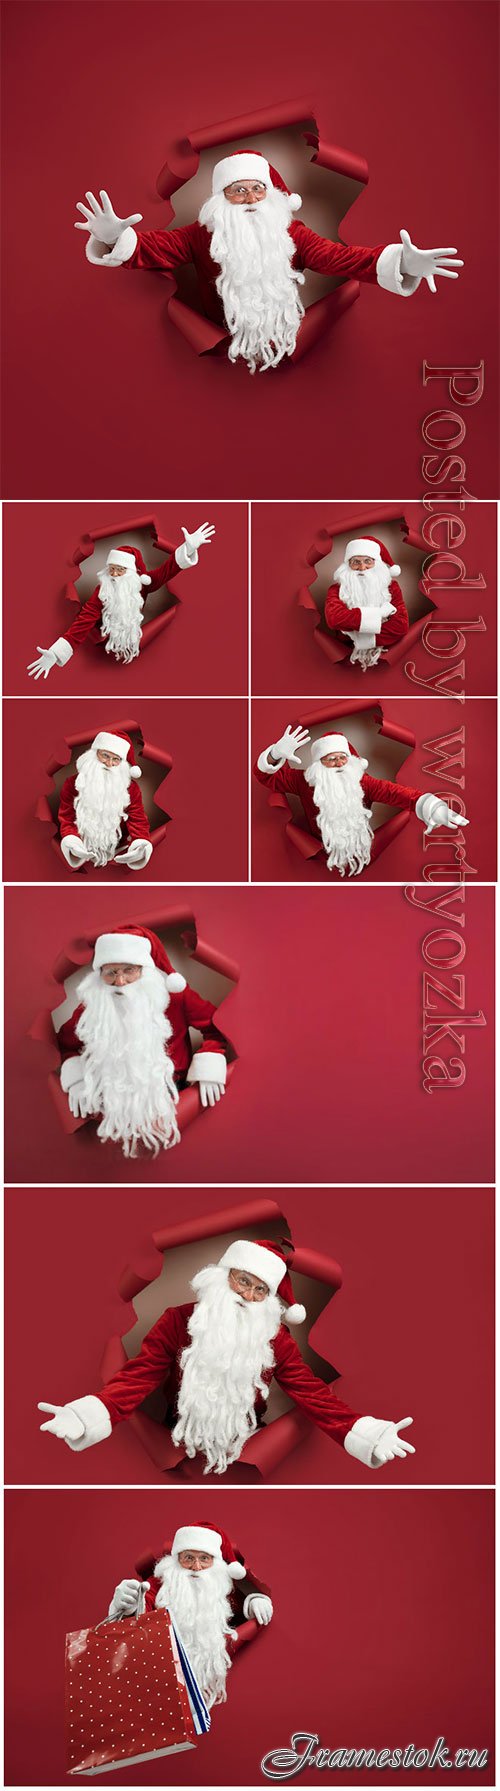 Santa man looking through hole on red paper